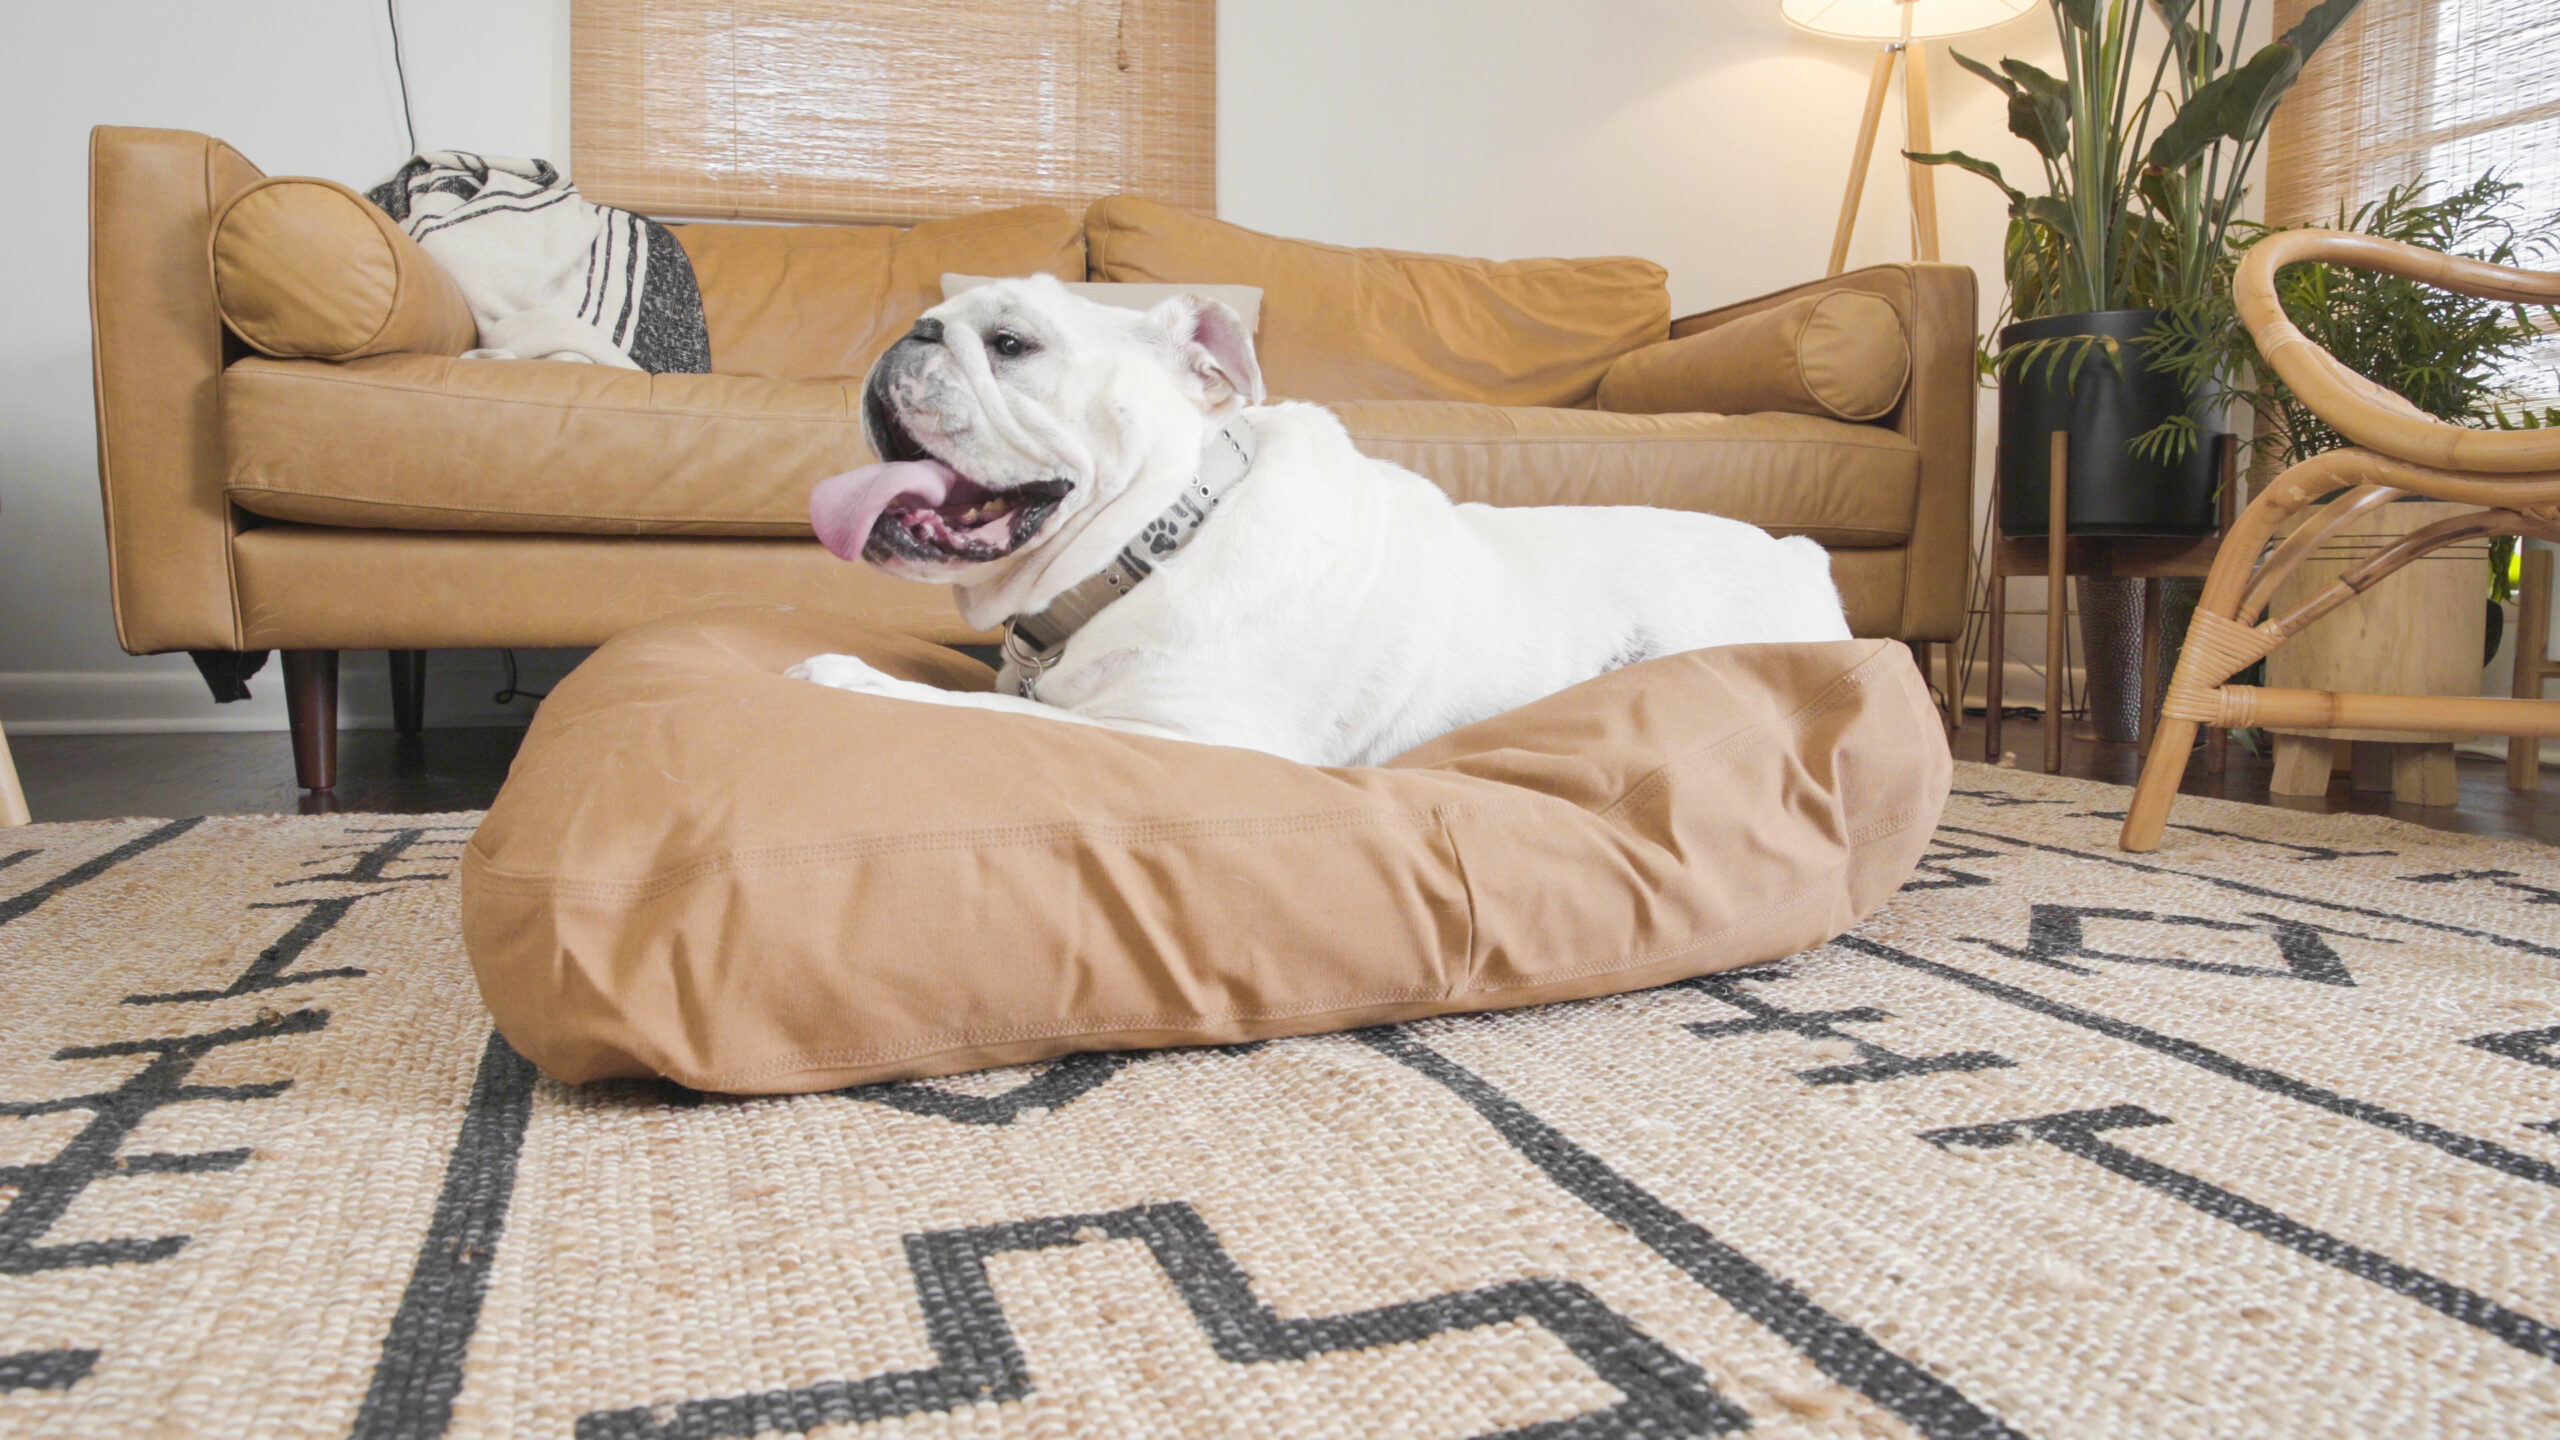 How do I get the dog smell out of my dogs bed?